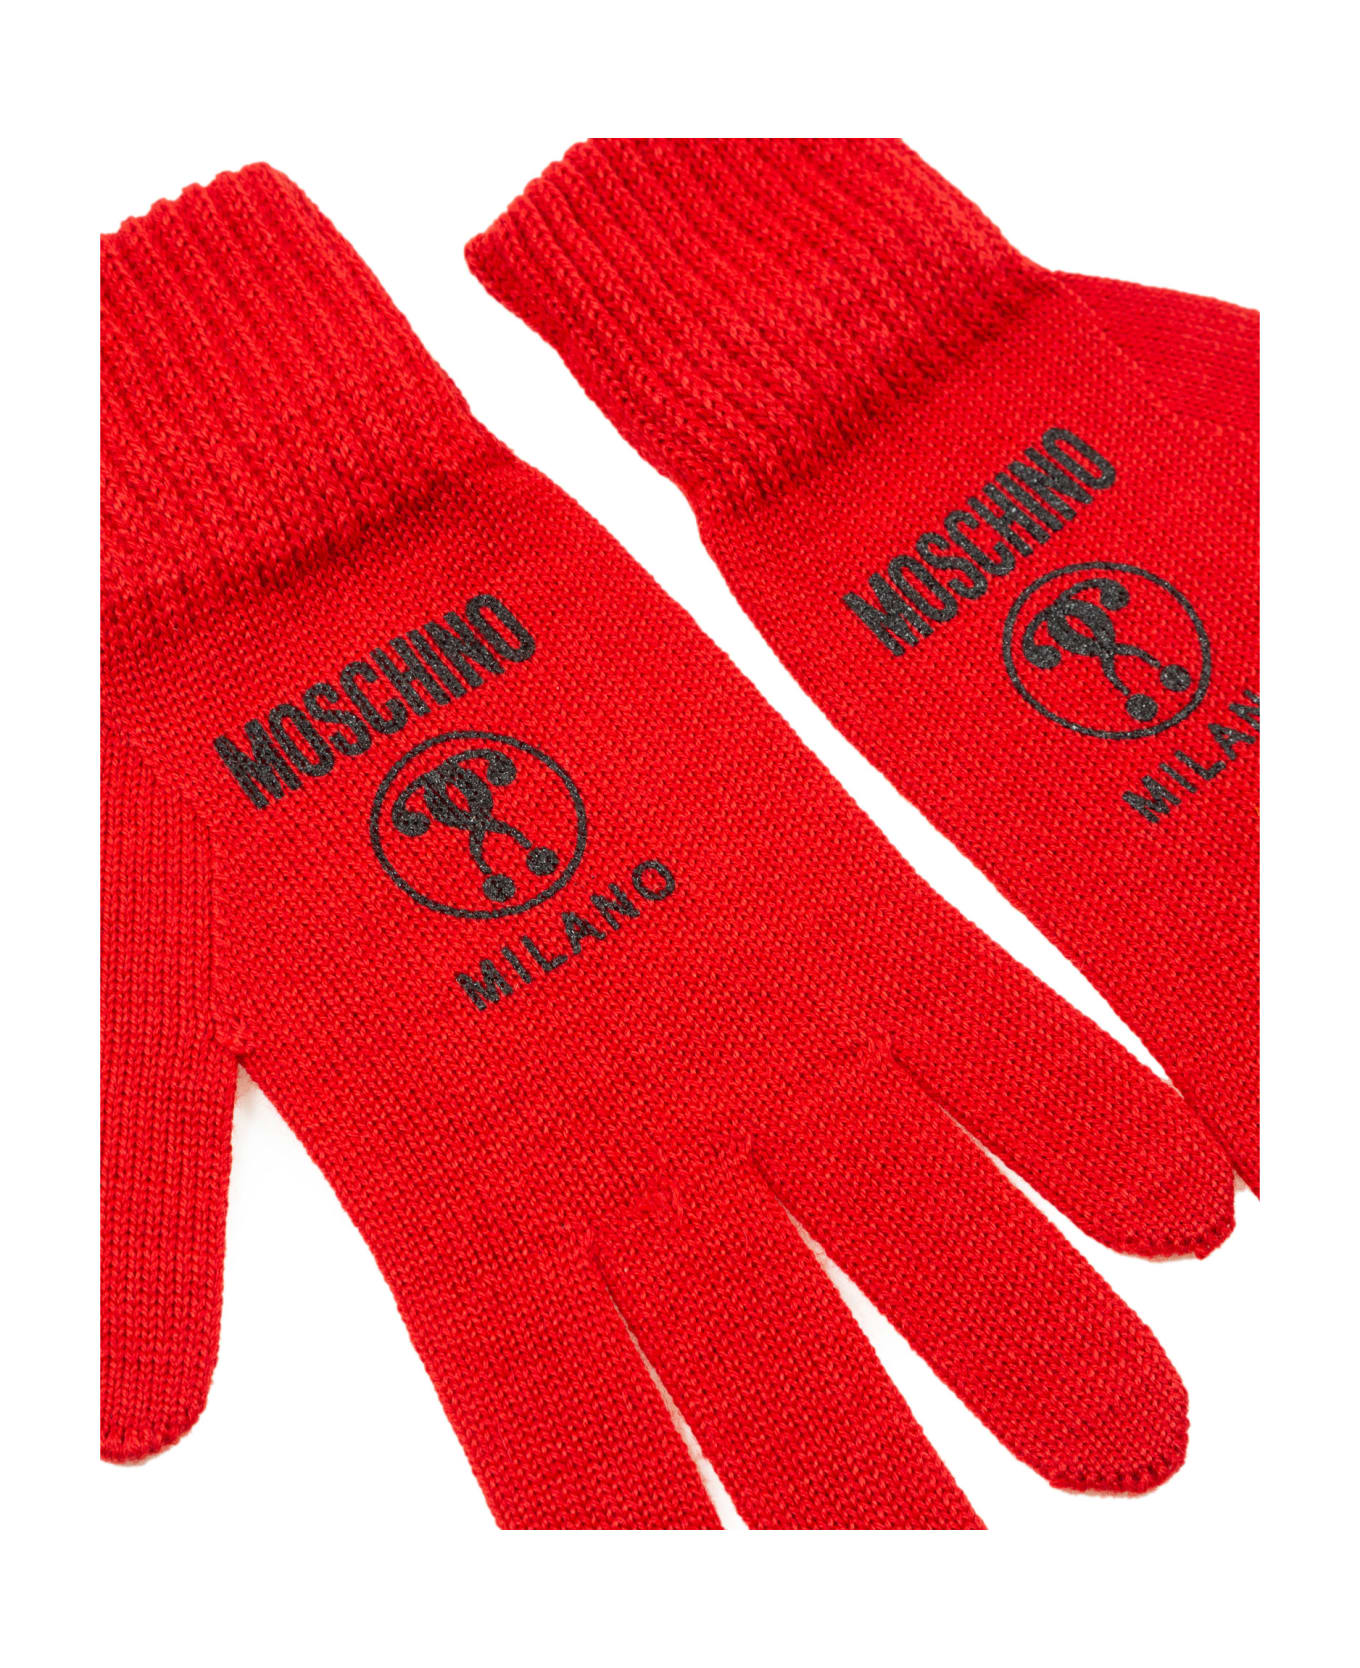 Moschino Double Question Mark Wool Gloves - Red